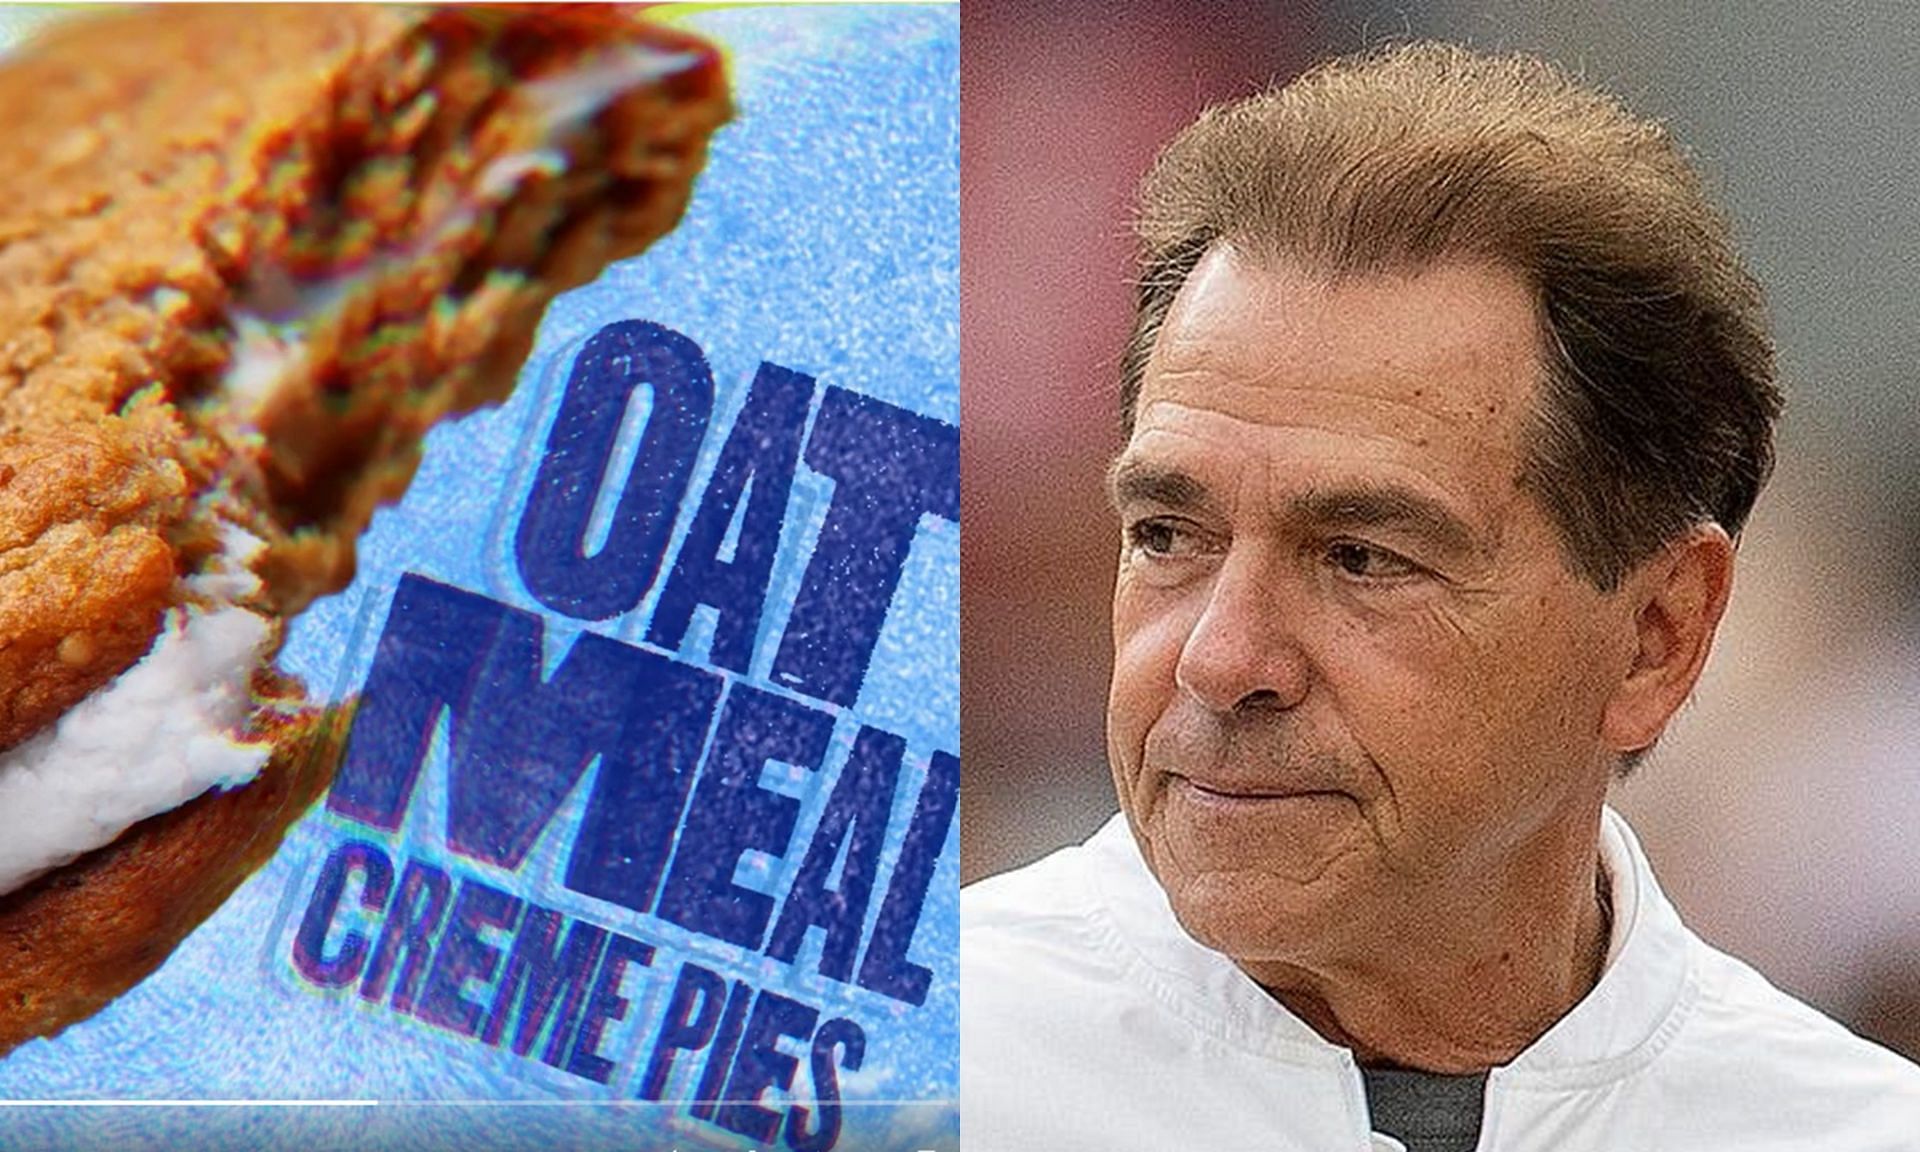 Nick Saban manages to keep it light with his witty take on Oatmeal Creme pies.